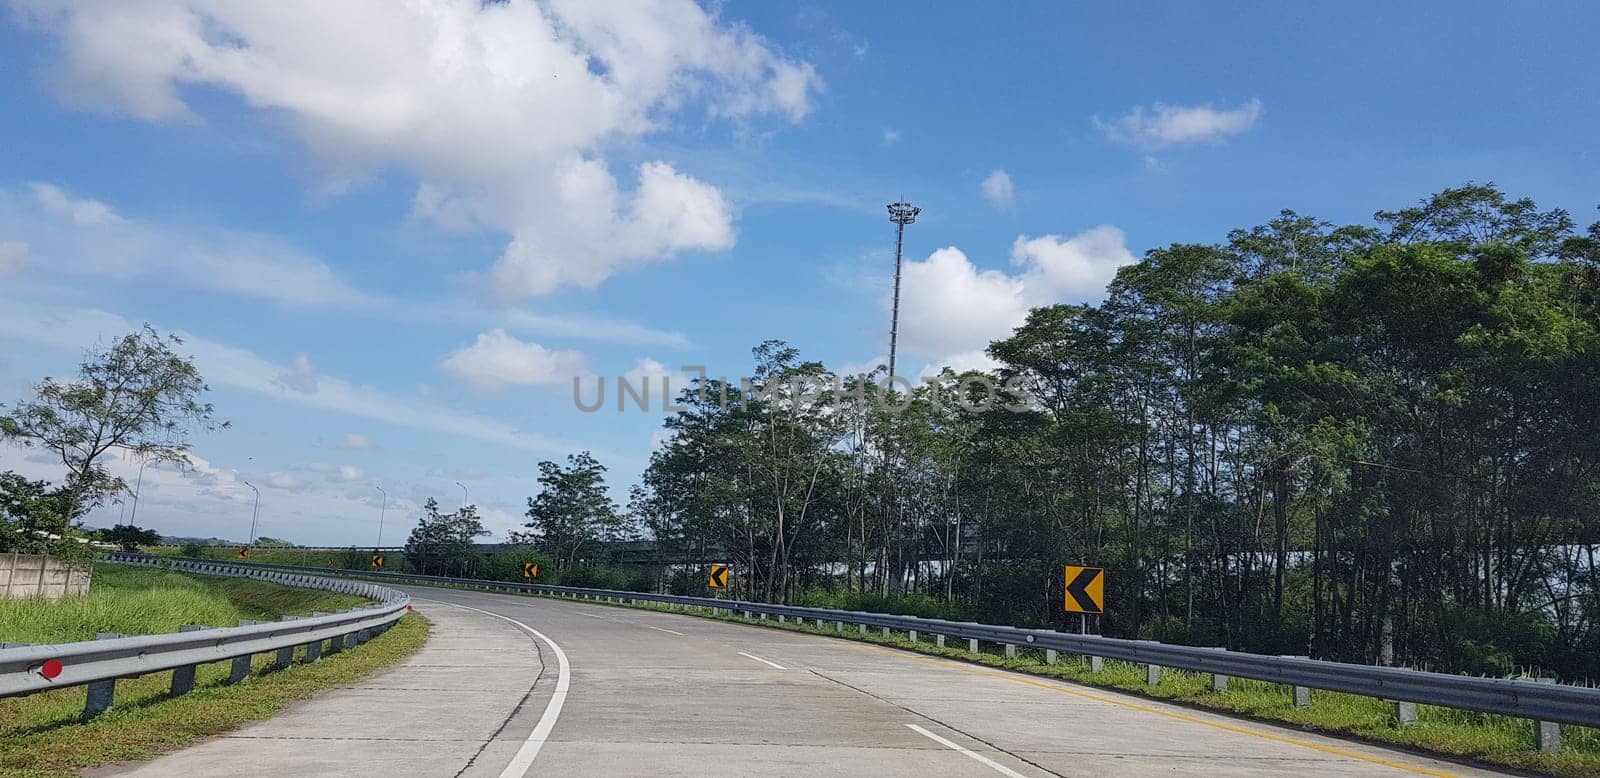 Indonesian toll road or highway, new government infrastructure project during recent year